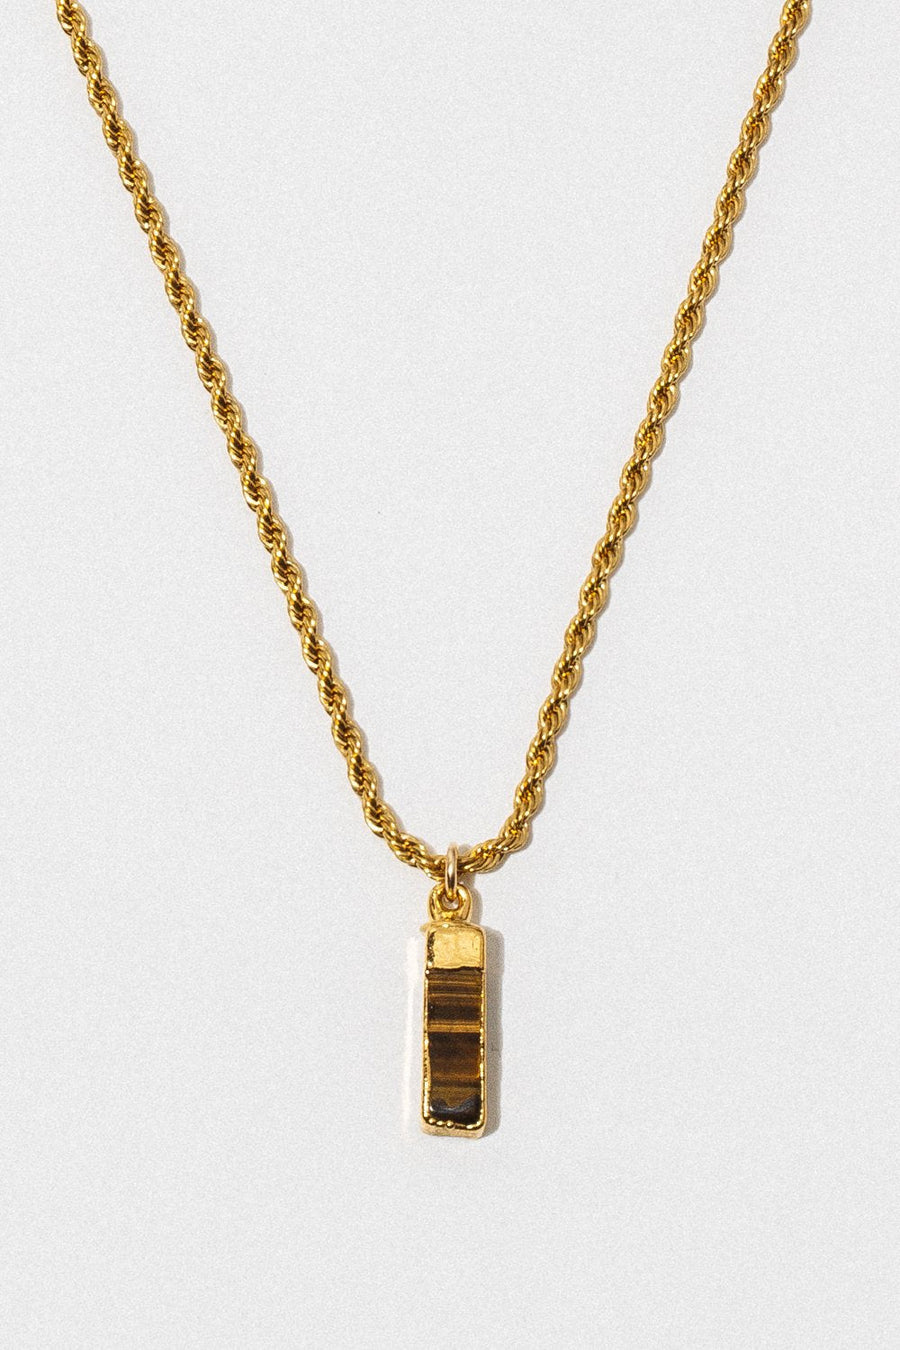 Goddess Jewelry Gold / 18 Inches Novella Tigers Eye Necklace